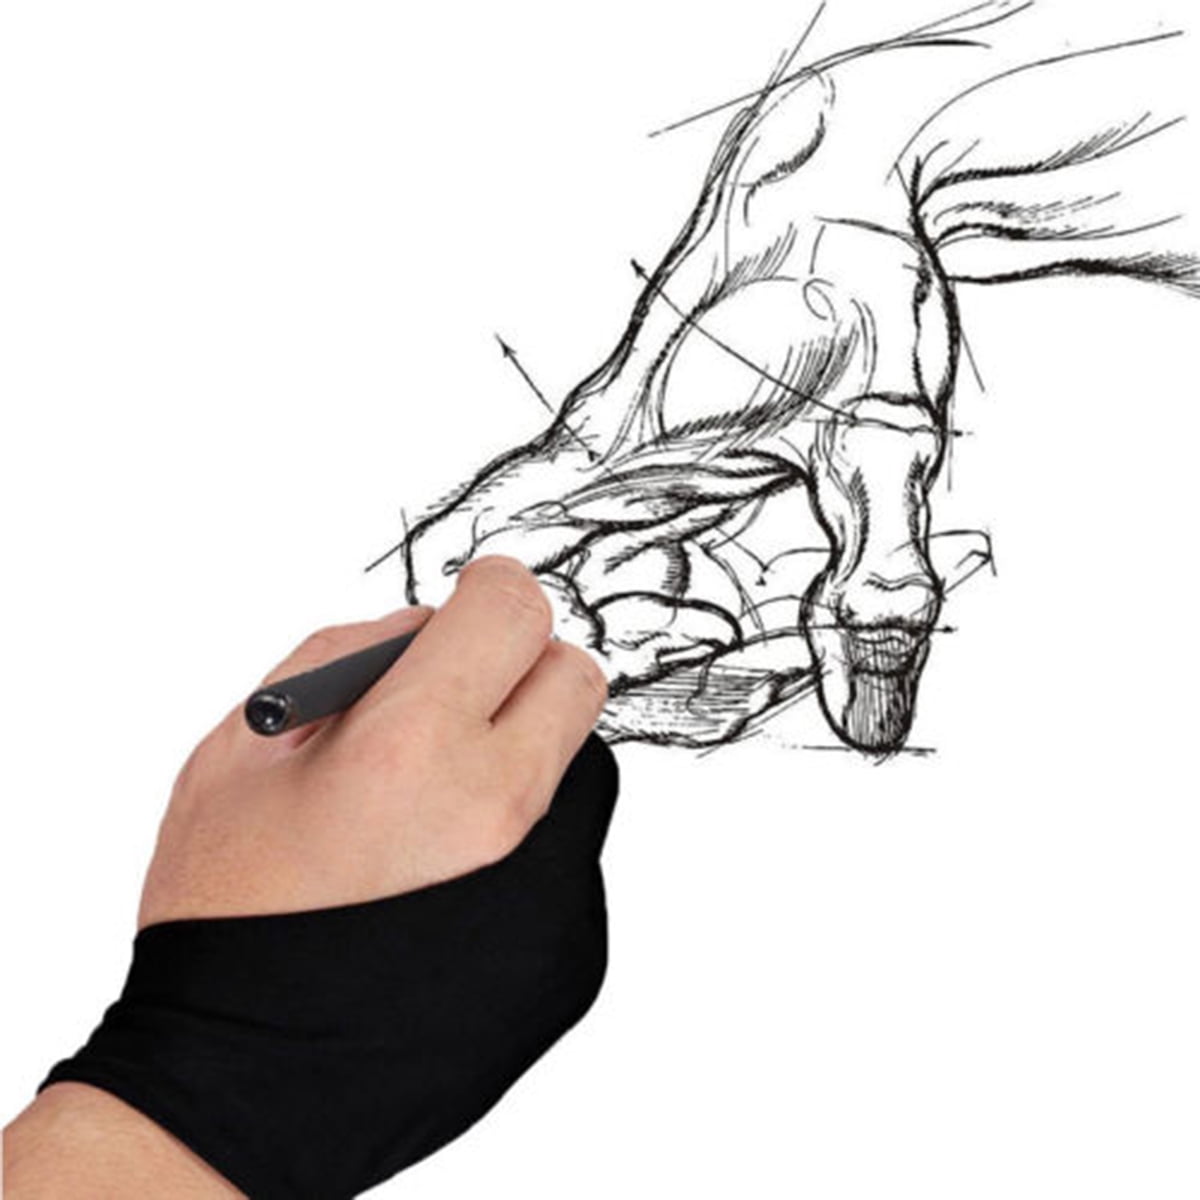 3PCS Professional Artist Drawing Glove Anti Fouling Finger Gloves